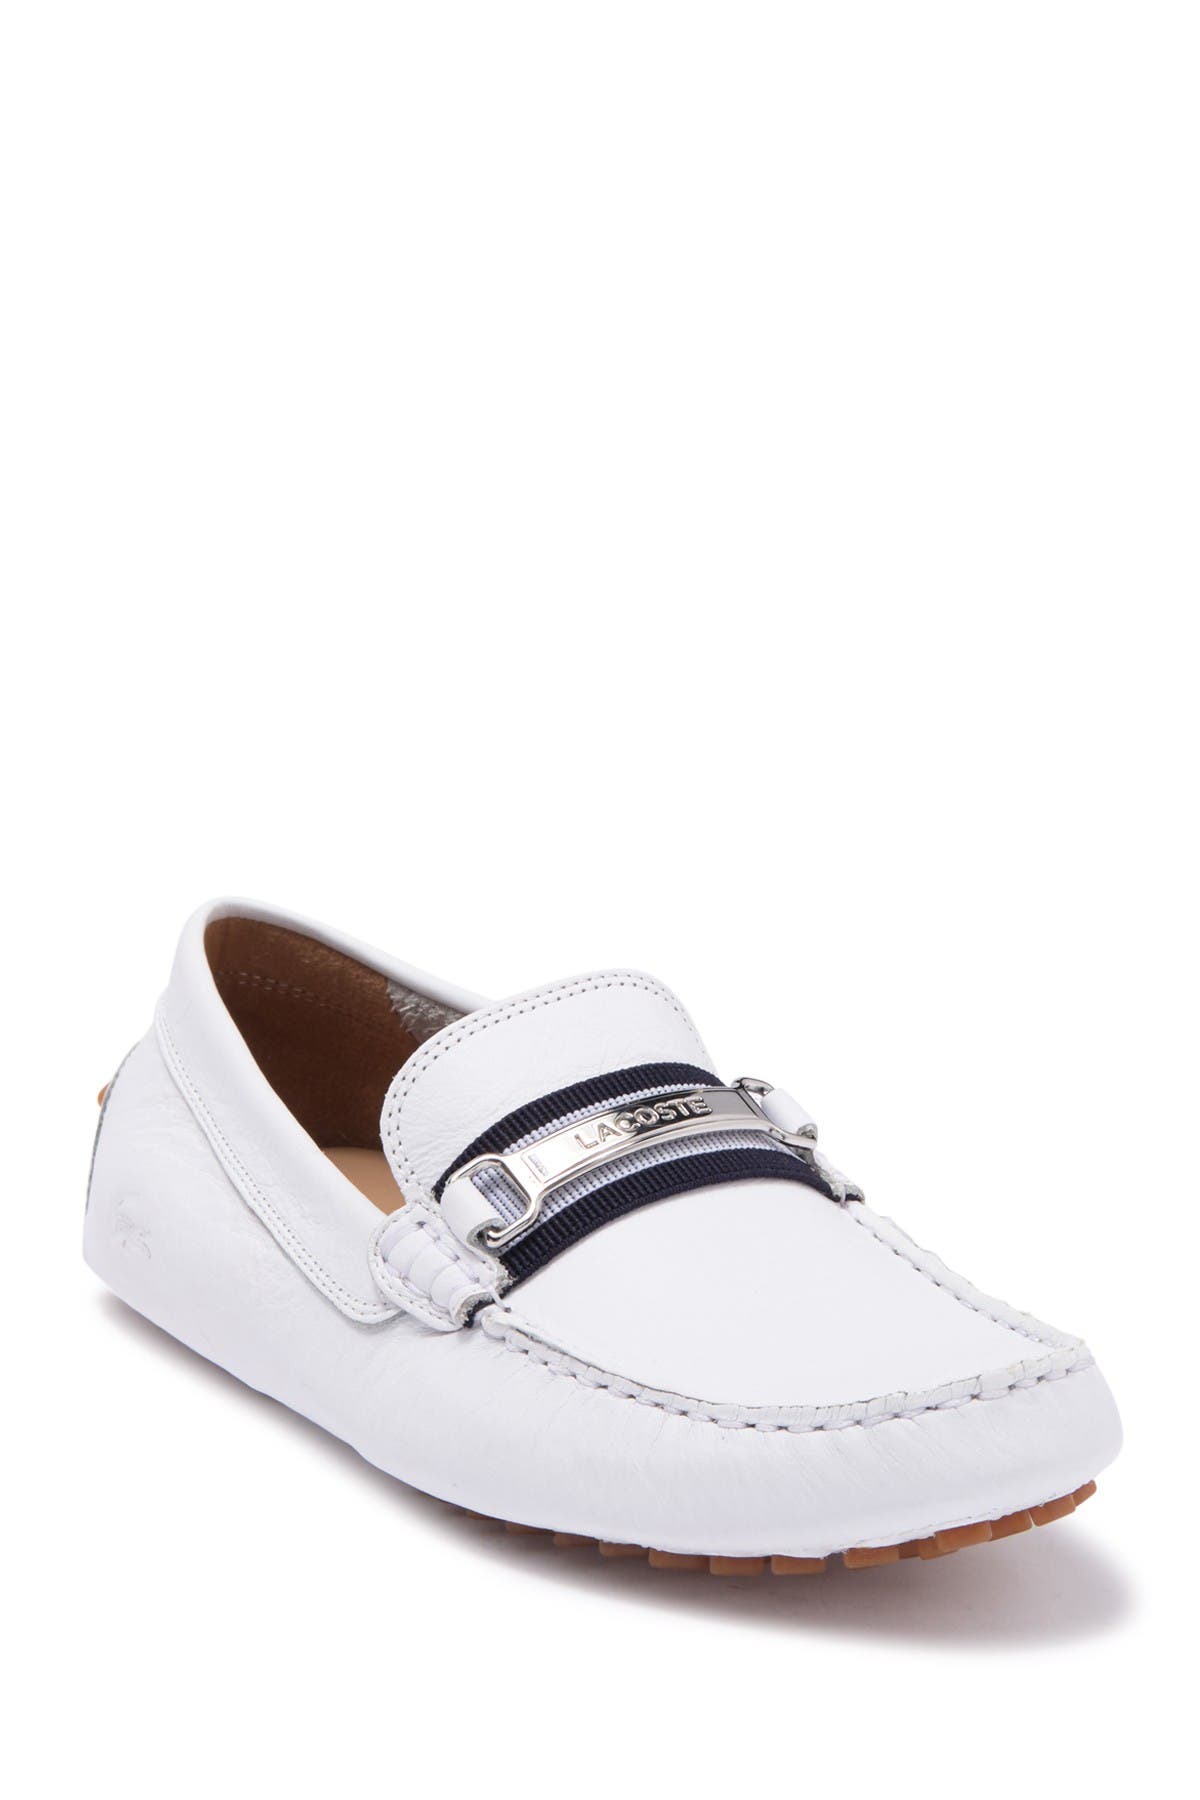 lacoste shoes nordstrom rack